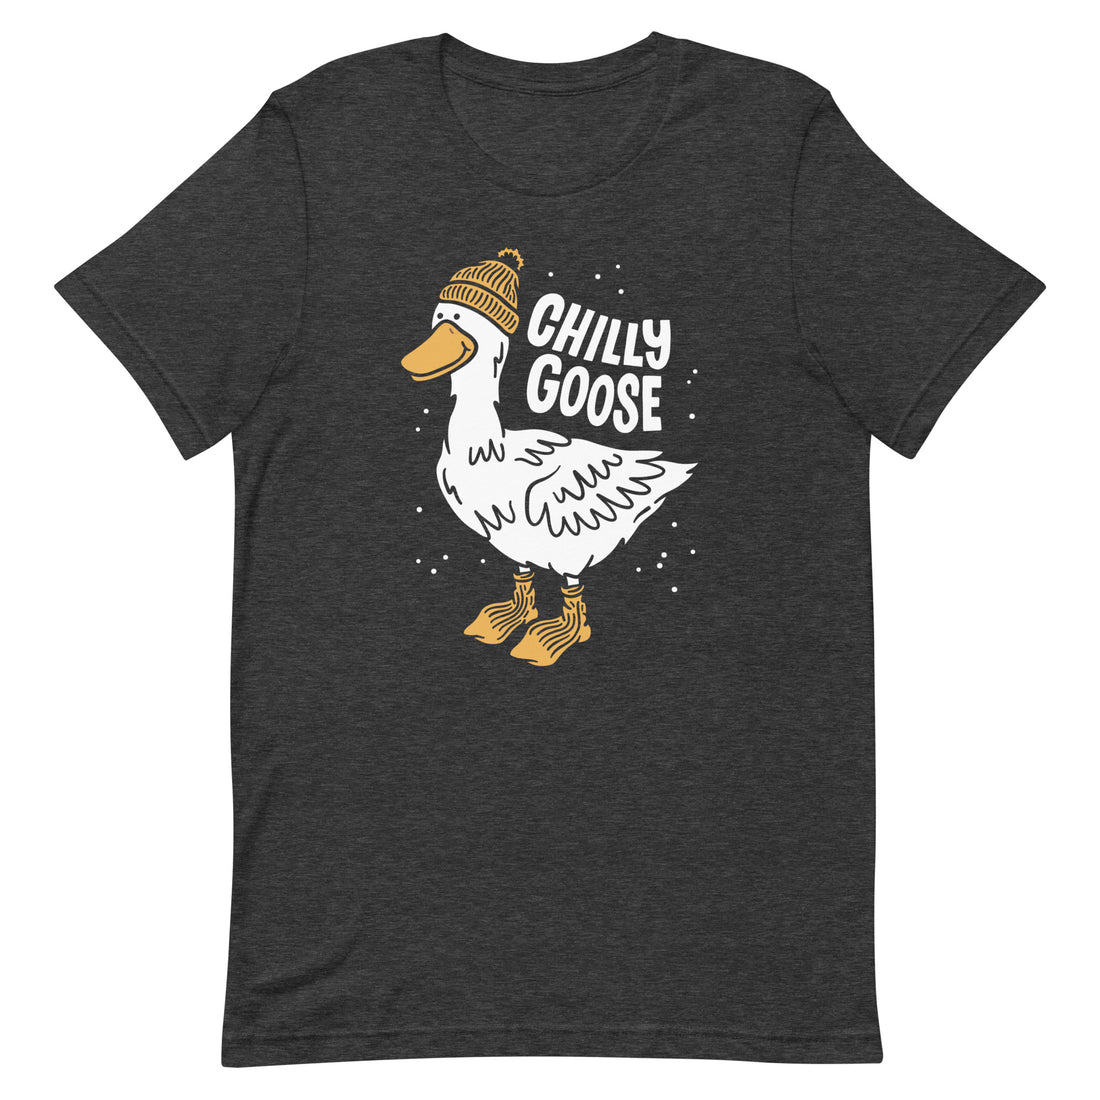 Chilly Goose Tee